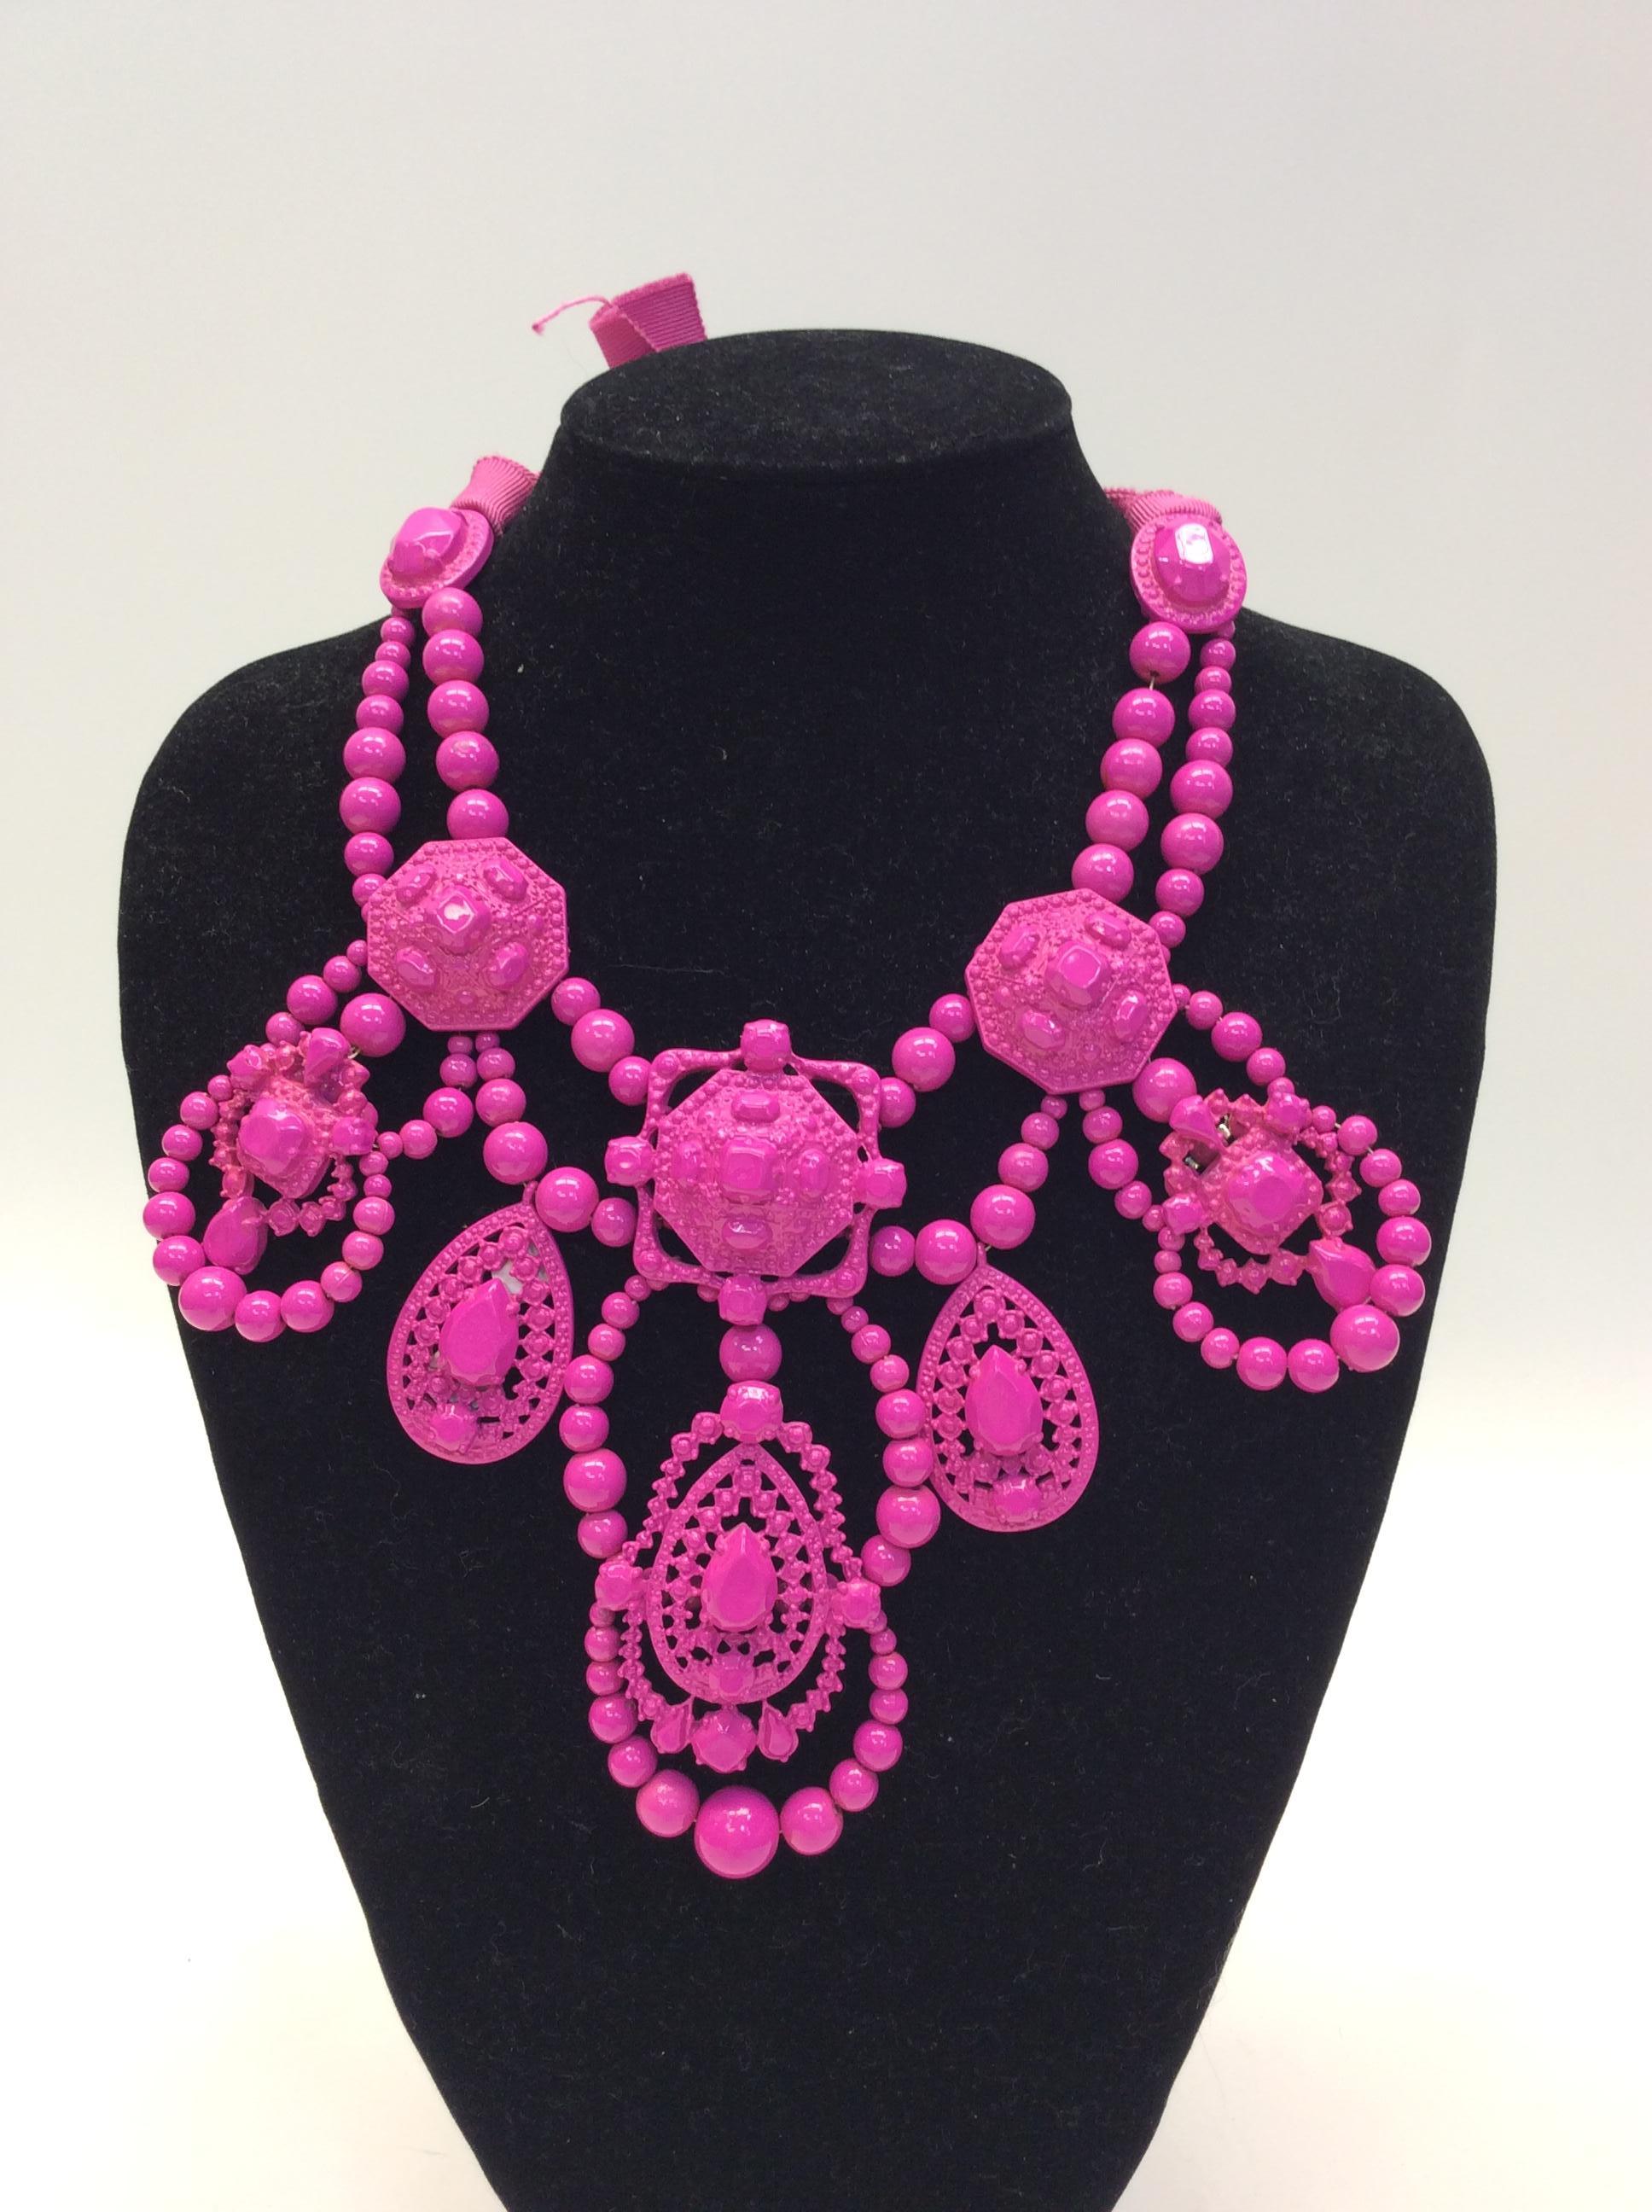 Lanvin Pink Chandelier Beaded Necklace
$550
Ribbon Tie Closure
Circumference 18